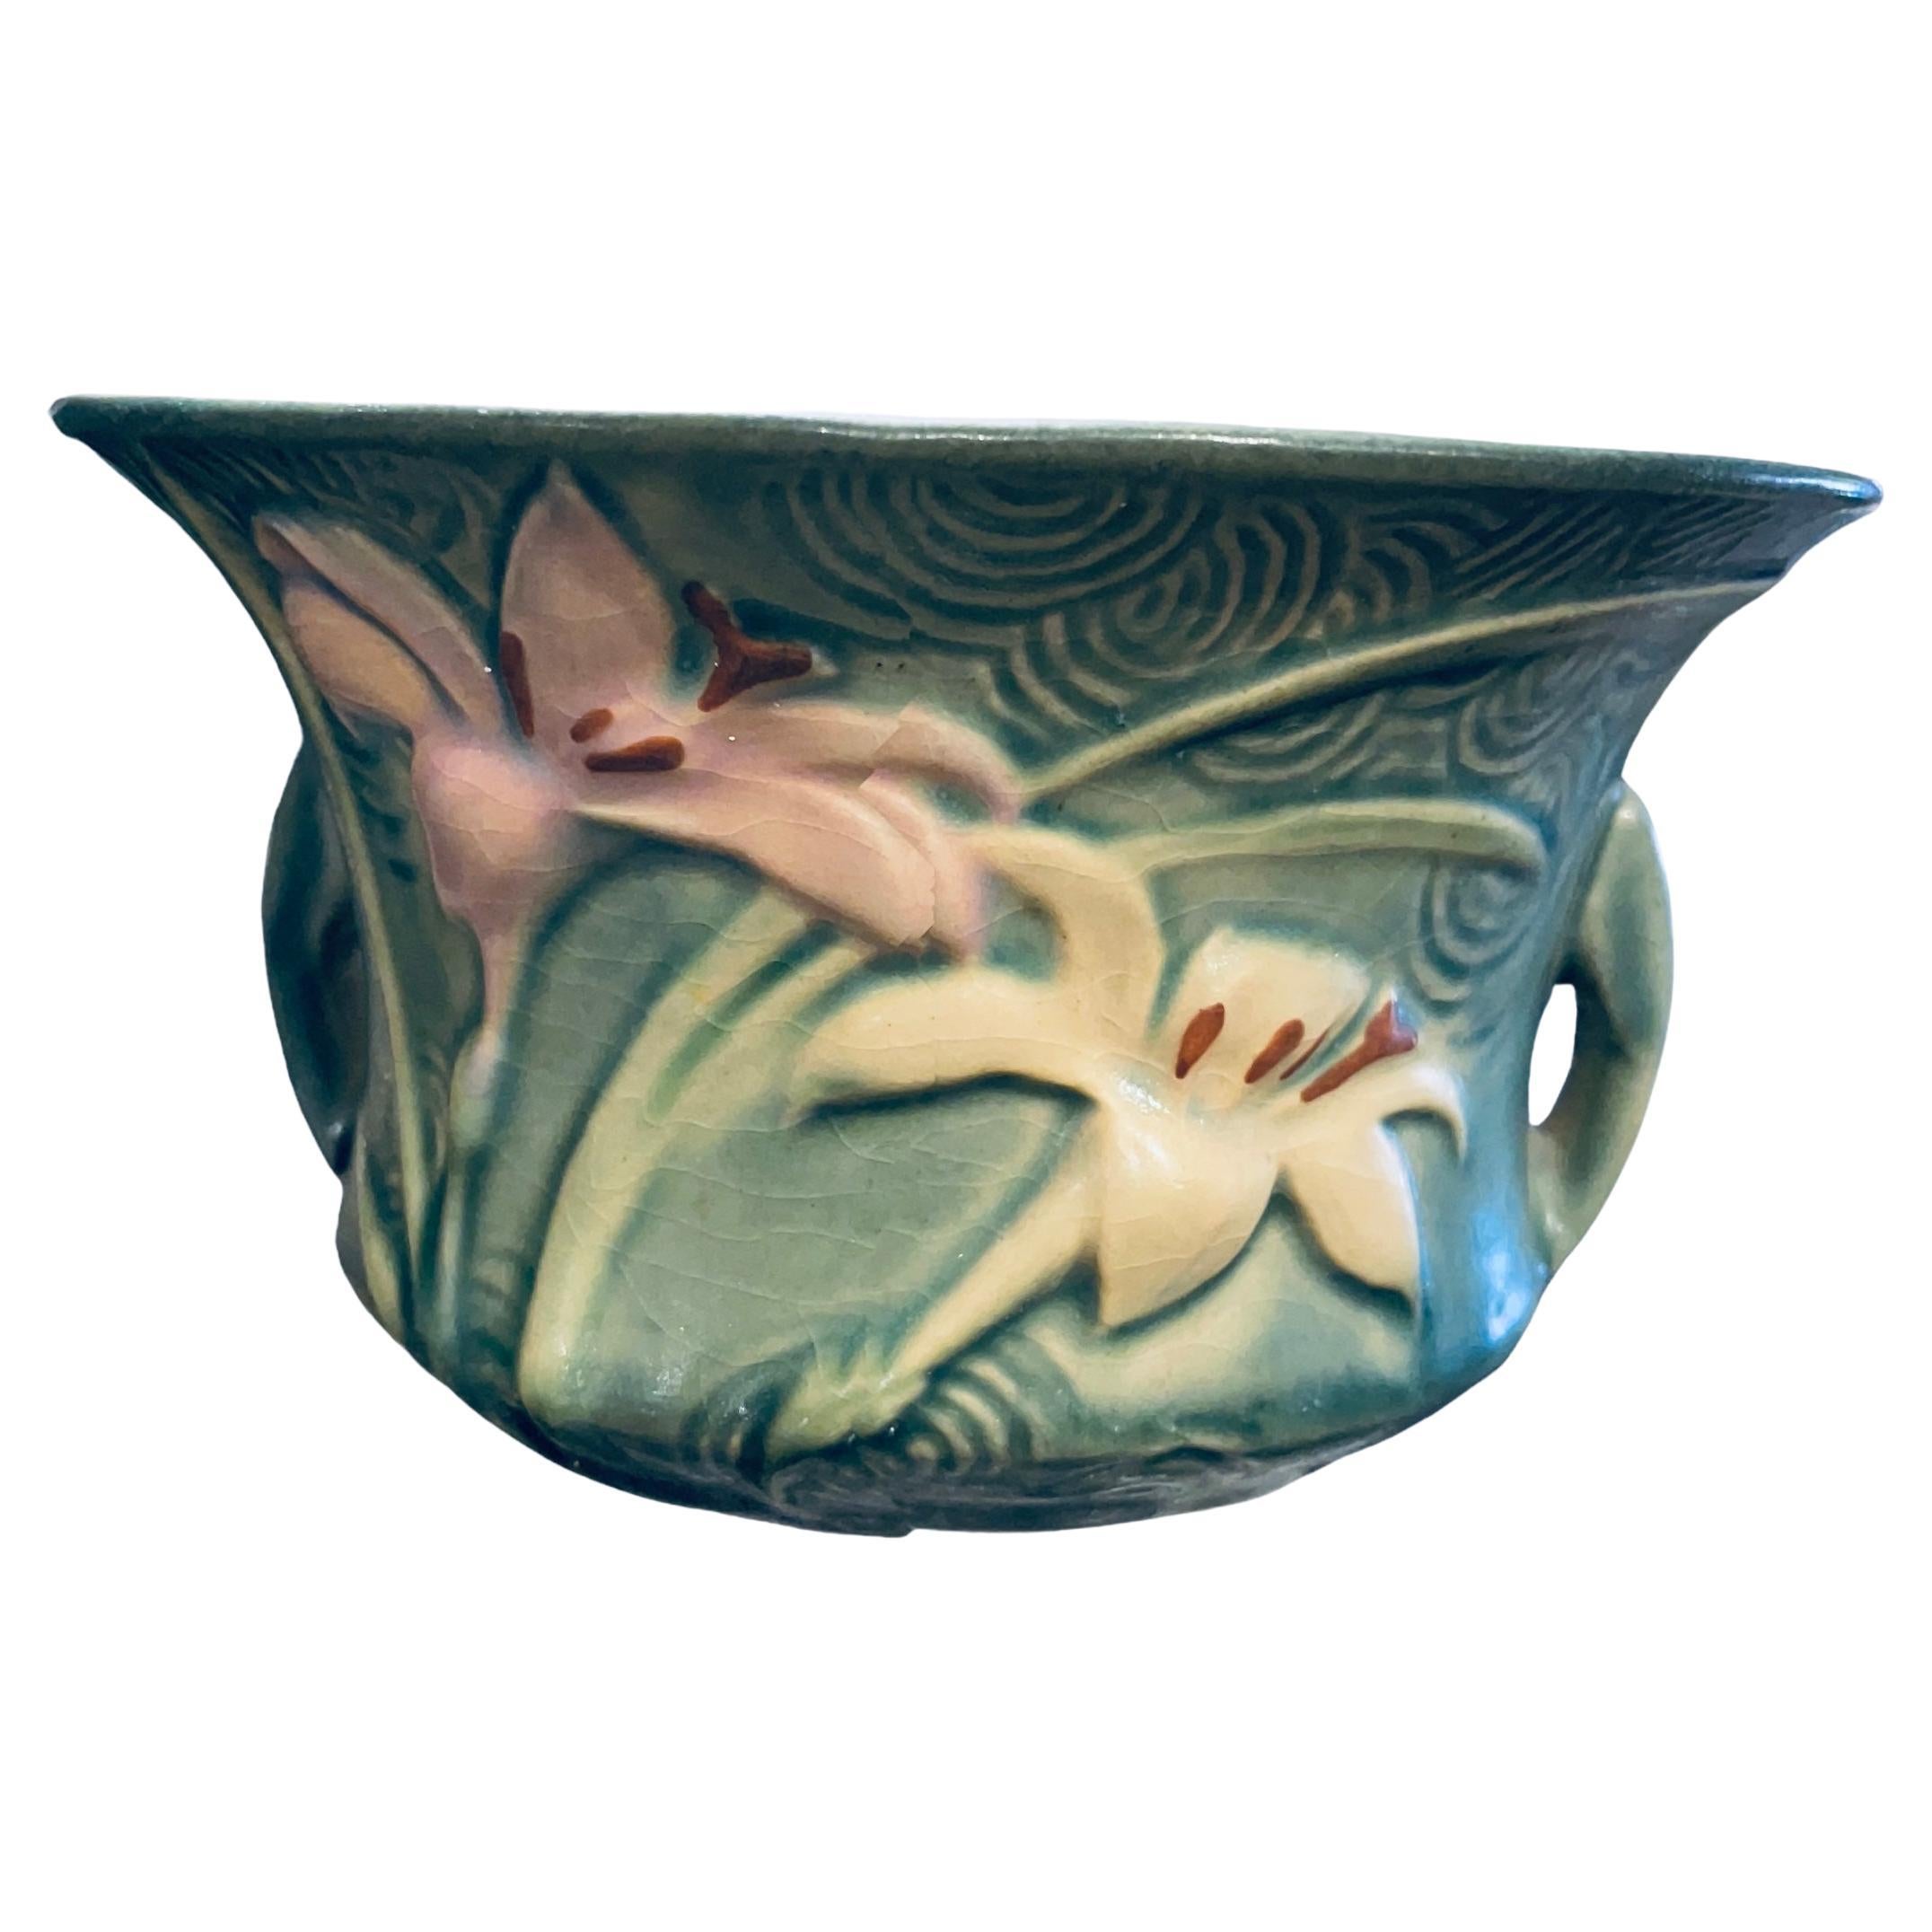 This is a Roseville Art Pottery Zephyr Lilies flowers pattern bowl. The bowl is bell shaped. It is green and adorned with Zephyr Lilies pink and white flowers with yellow/green leaves in the front and back. A relief of scalloped pattern also adorned